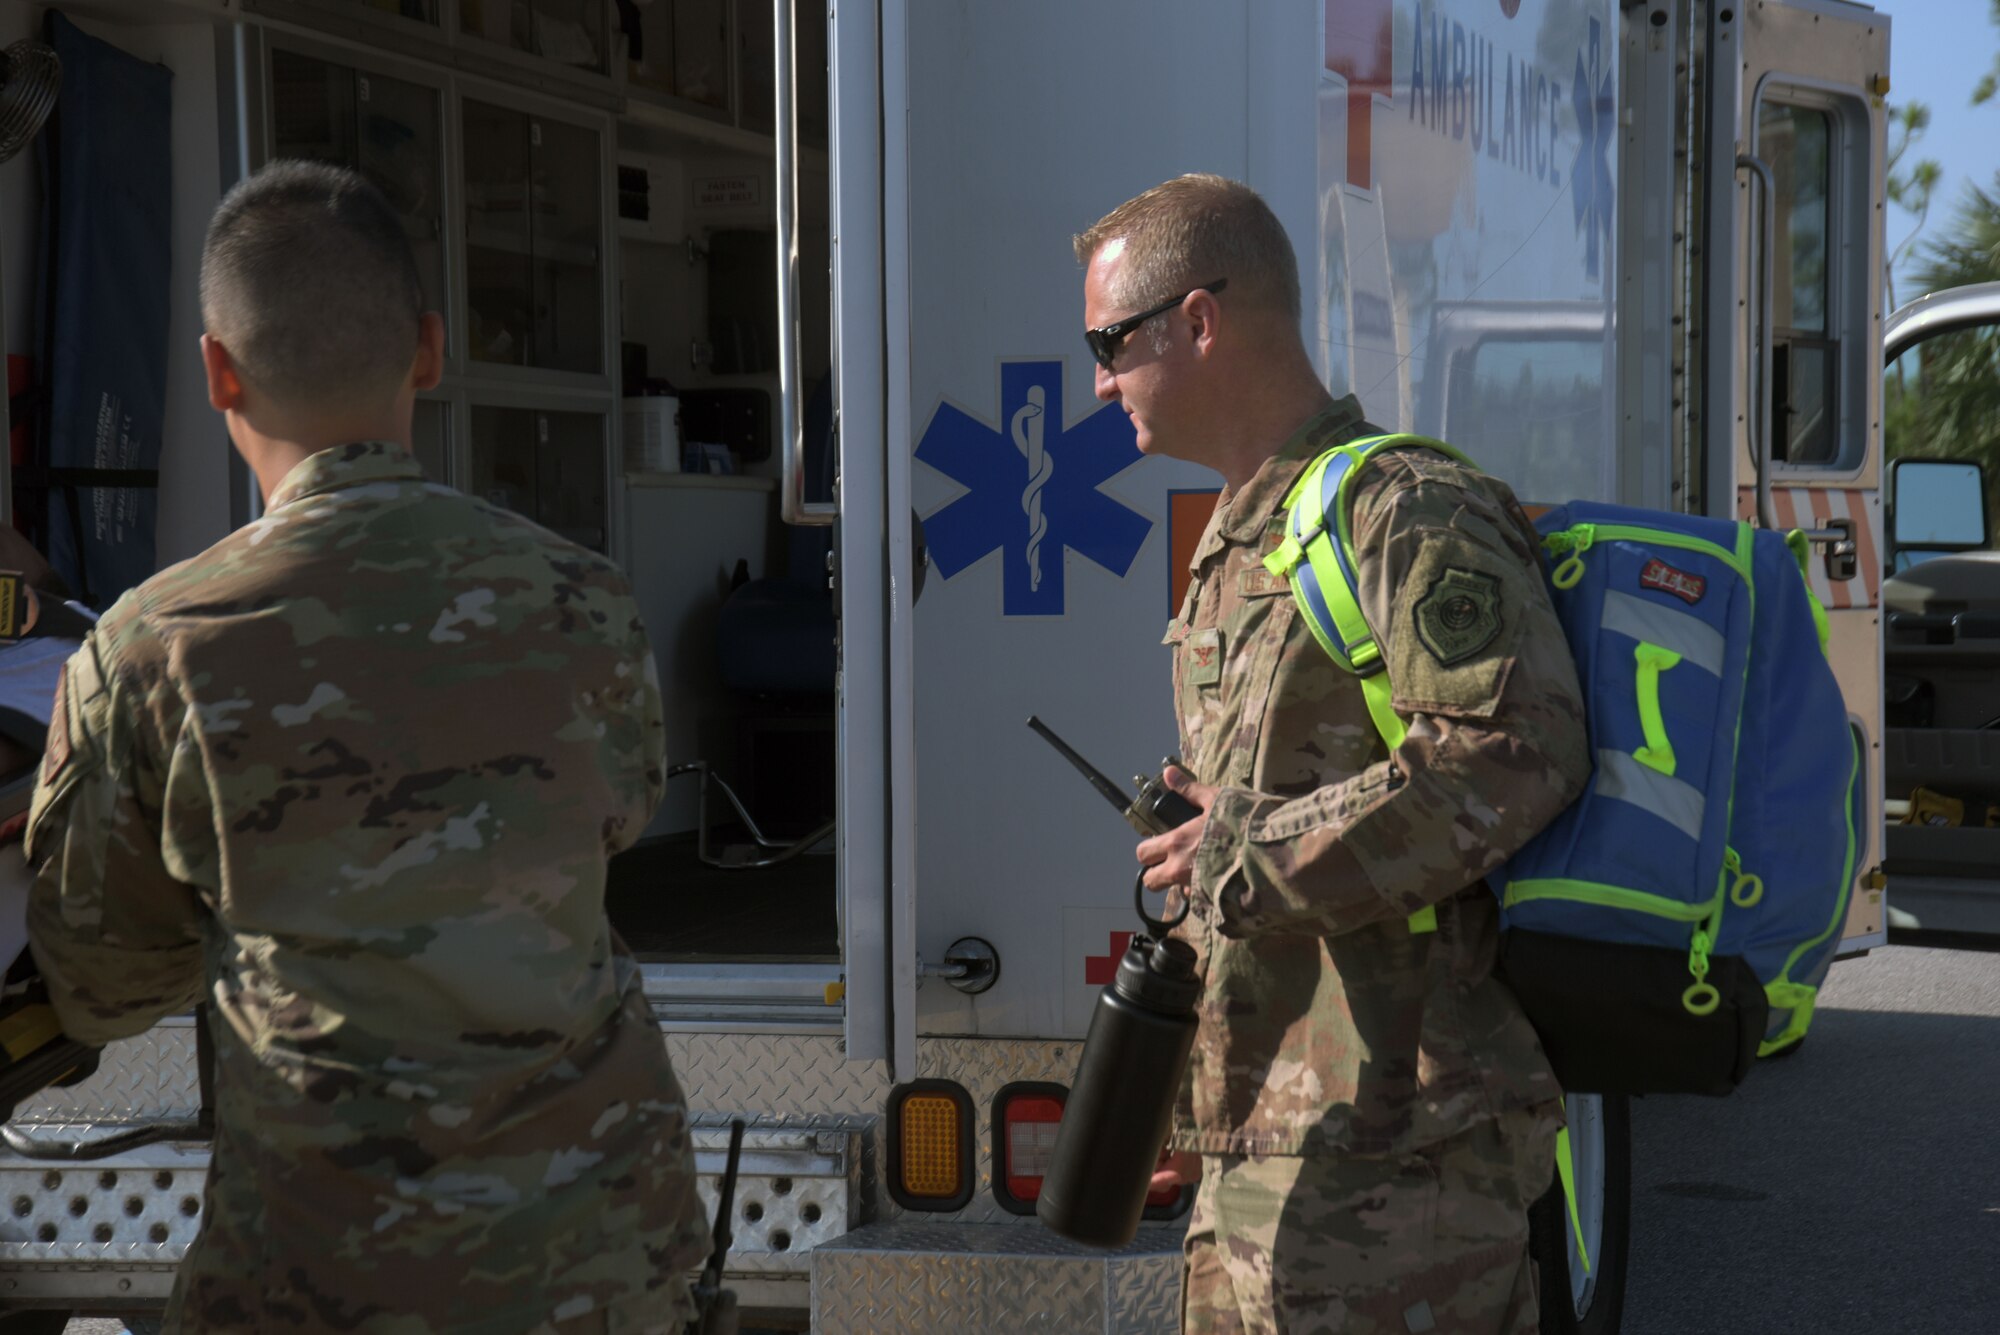 Col. Brian Laidlaw, 325th Fighter Wing commander, carries an emergency medical response go-bag during an exercise Oct. 4, 2019, at Tyndall Air Force Base, Florida. The 325th Operational Medical Readiness Squadron Ambulance Services Department medics were chosen to represent the 325th Medical Group for the commander’s Airman Shadow Program, which aims to give the commander a first-hand view of what Airmen do on the job. (U.S. Air Force photo by Staff Sgt. Magen M. Reeves)